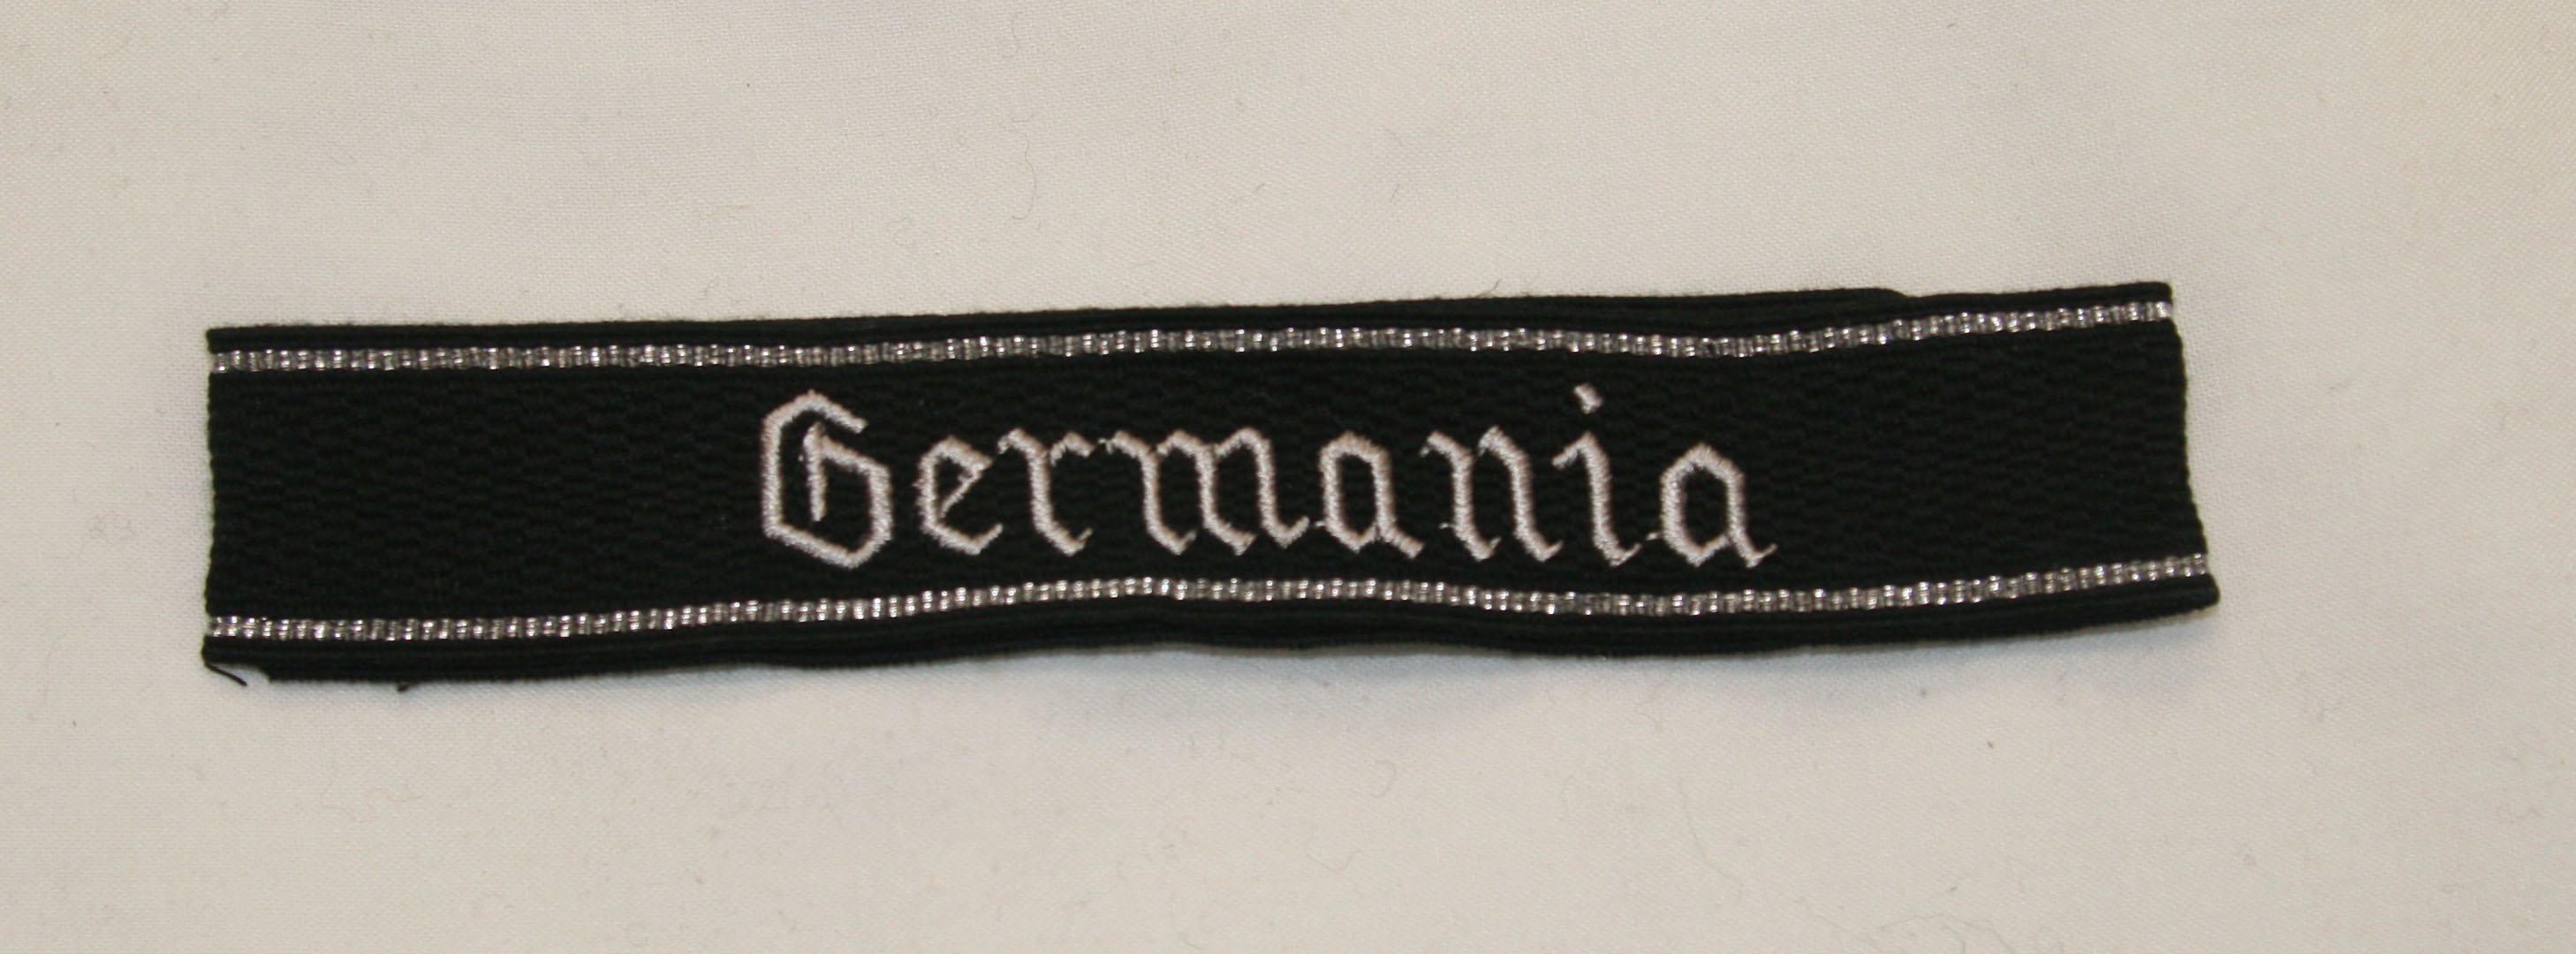 Waffen SS Divisional Cuff Title, Germania embroidered